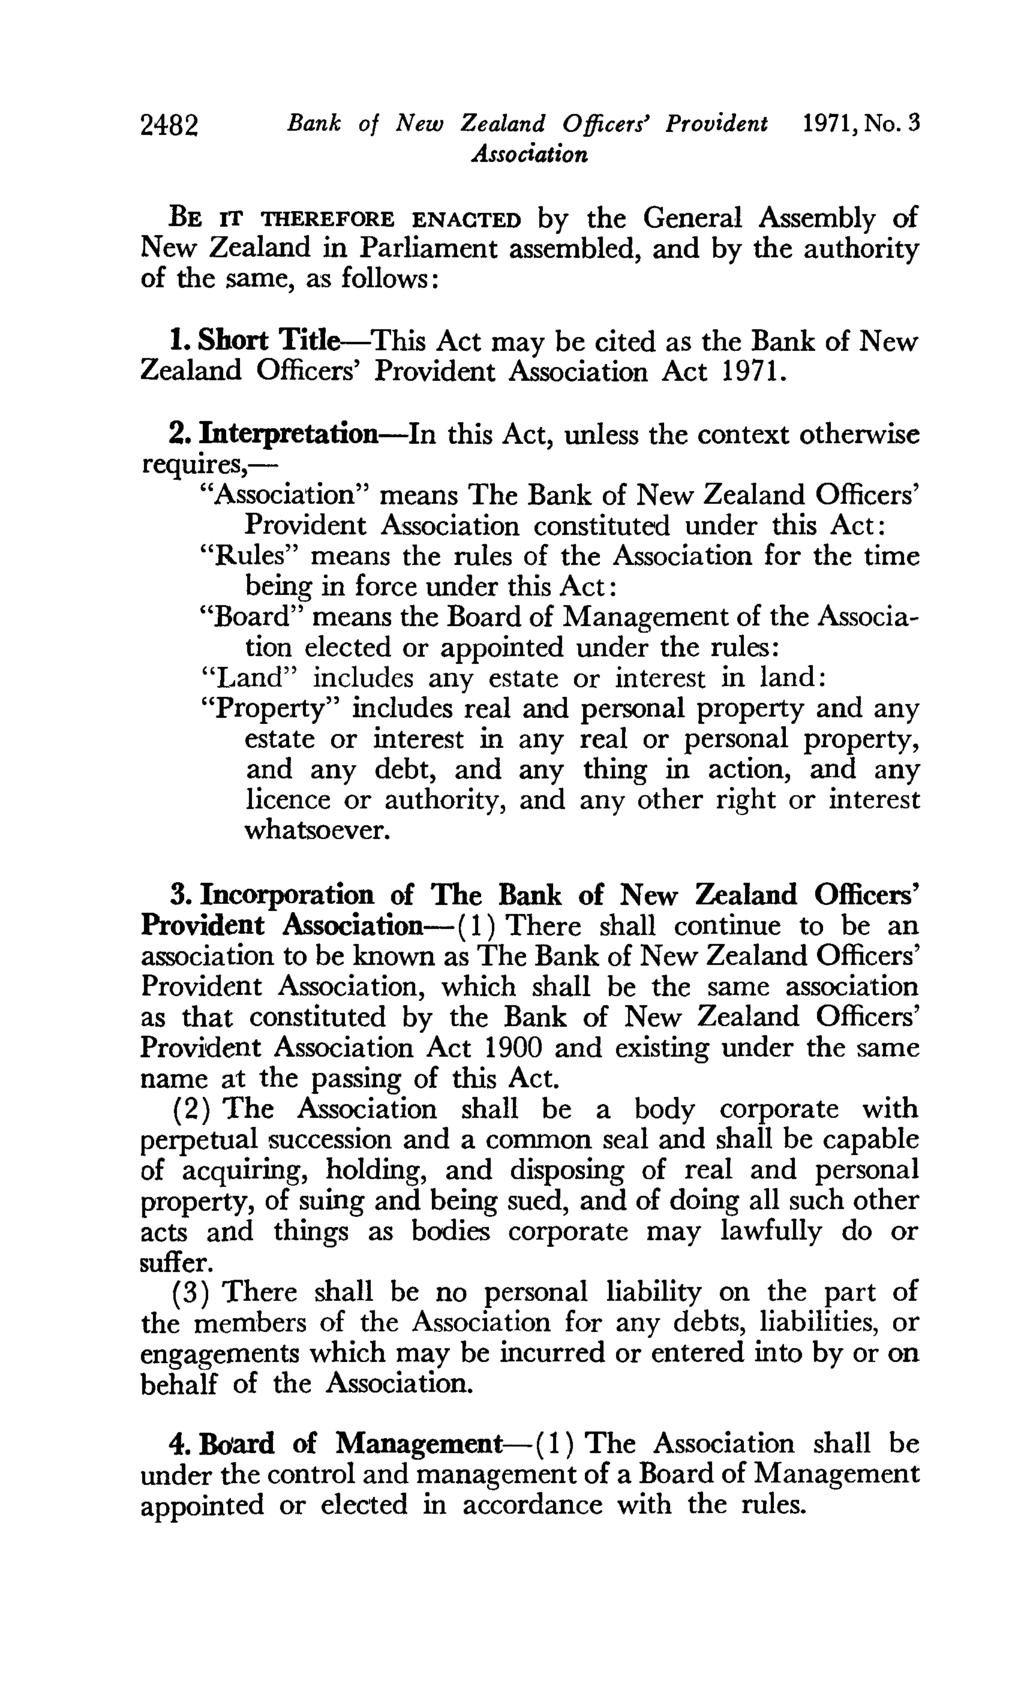 2482 Bank of New Zealand Officers' Provident 1971, No. 3 BE IT TIlEREFORE ENACTED by the General Assembly of New Zealand in Parliament assembled, and by the authority of the same, as follows: 1.